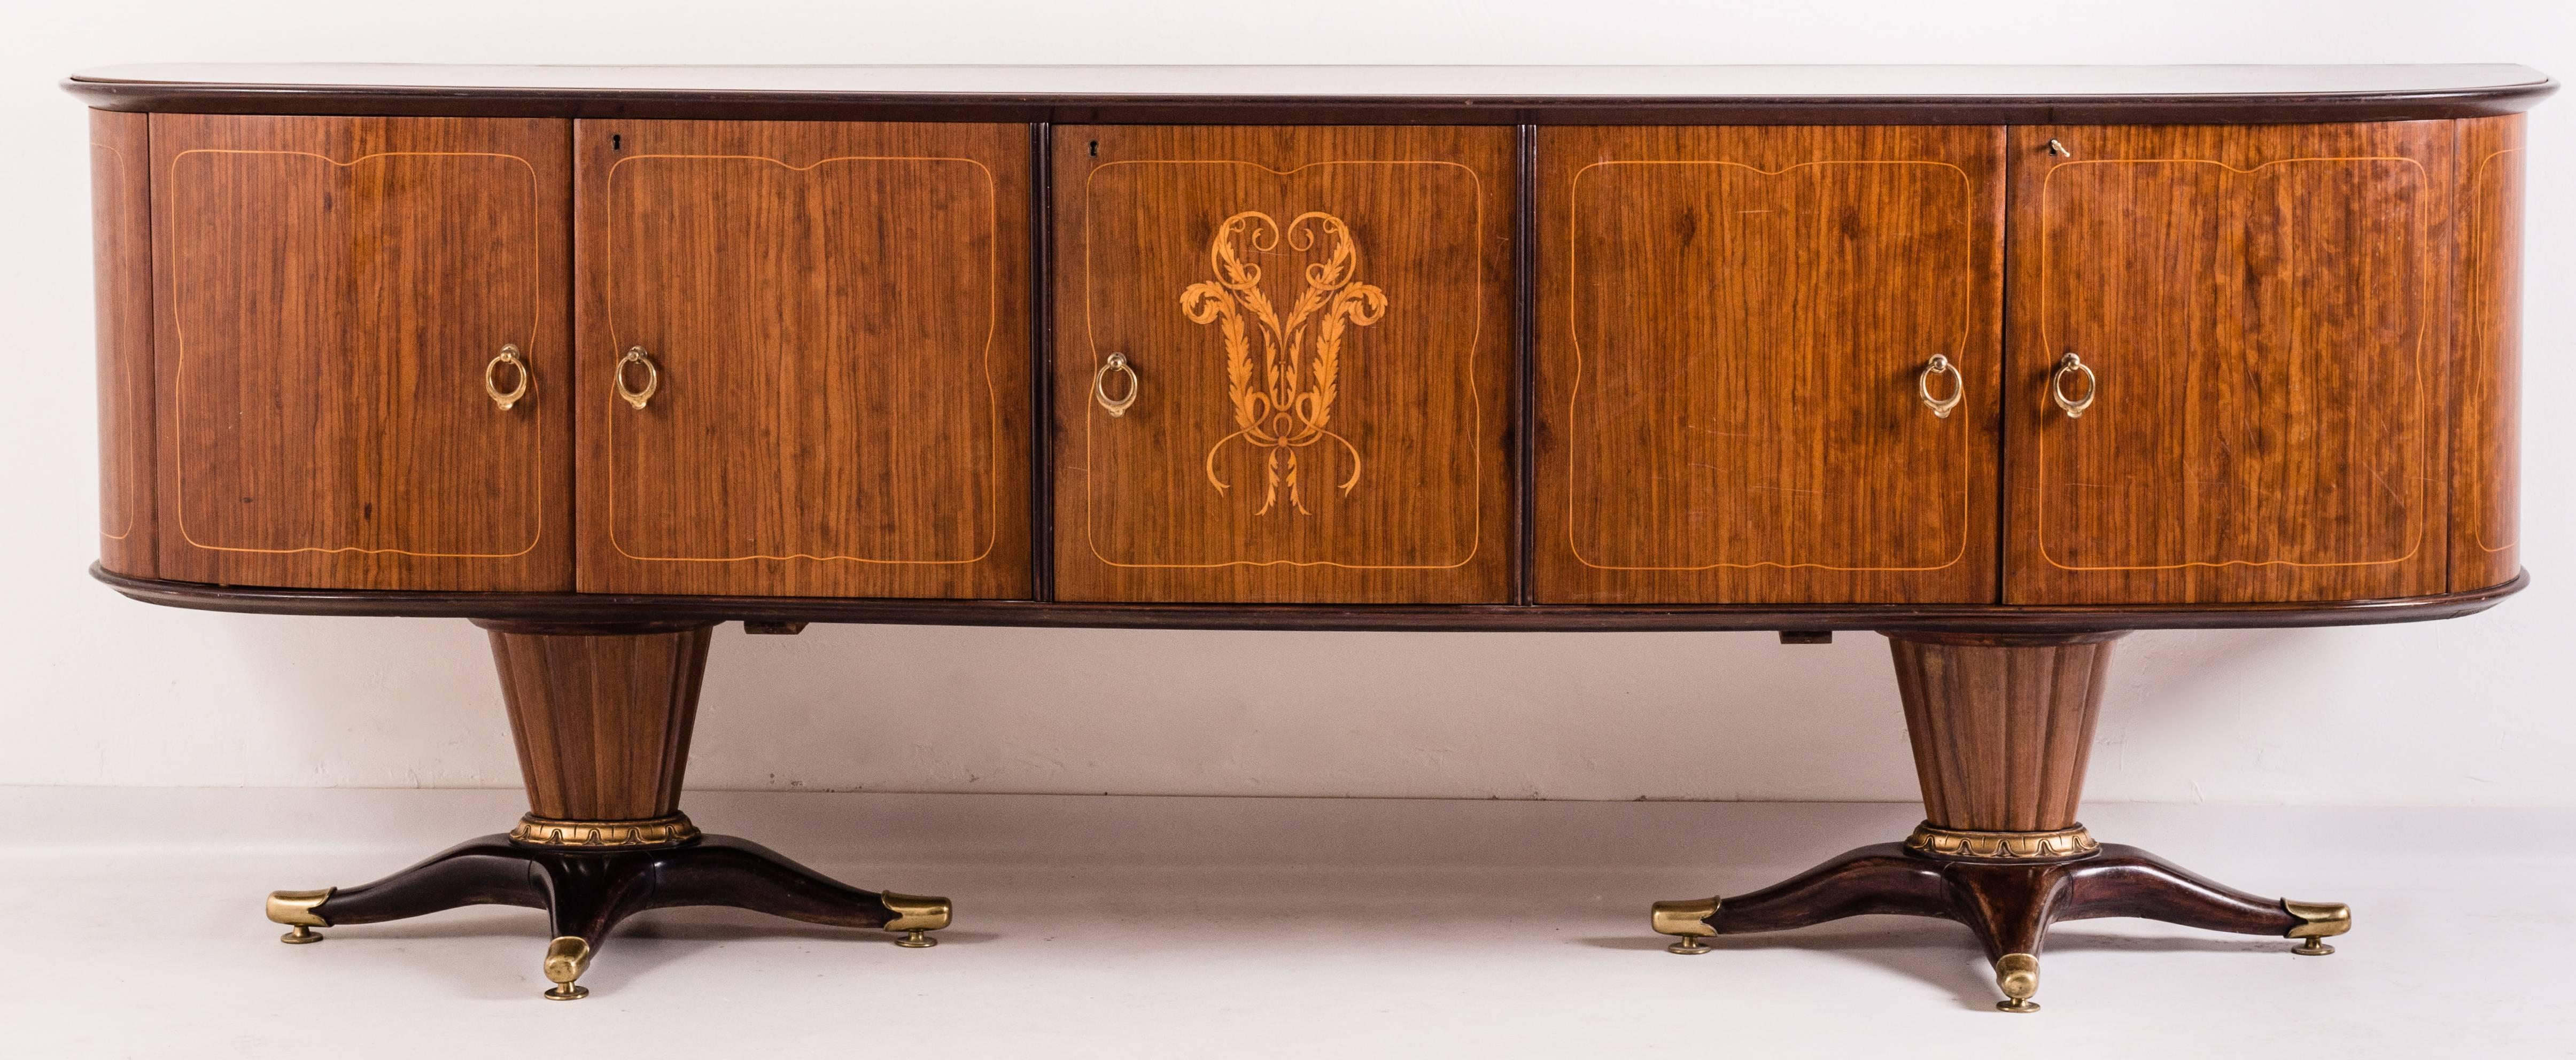 Italian Midcentury Sideboard with Mirror Attributed to Paolo Buffa, 1950s For Sale 1